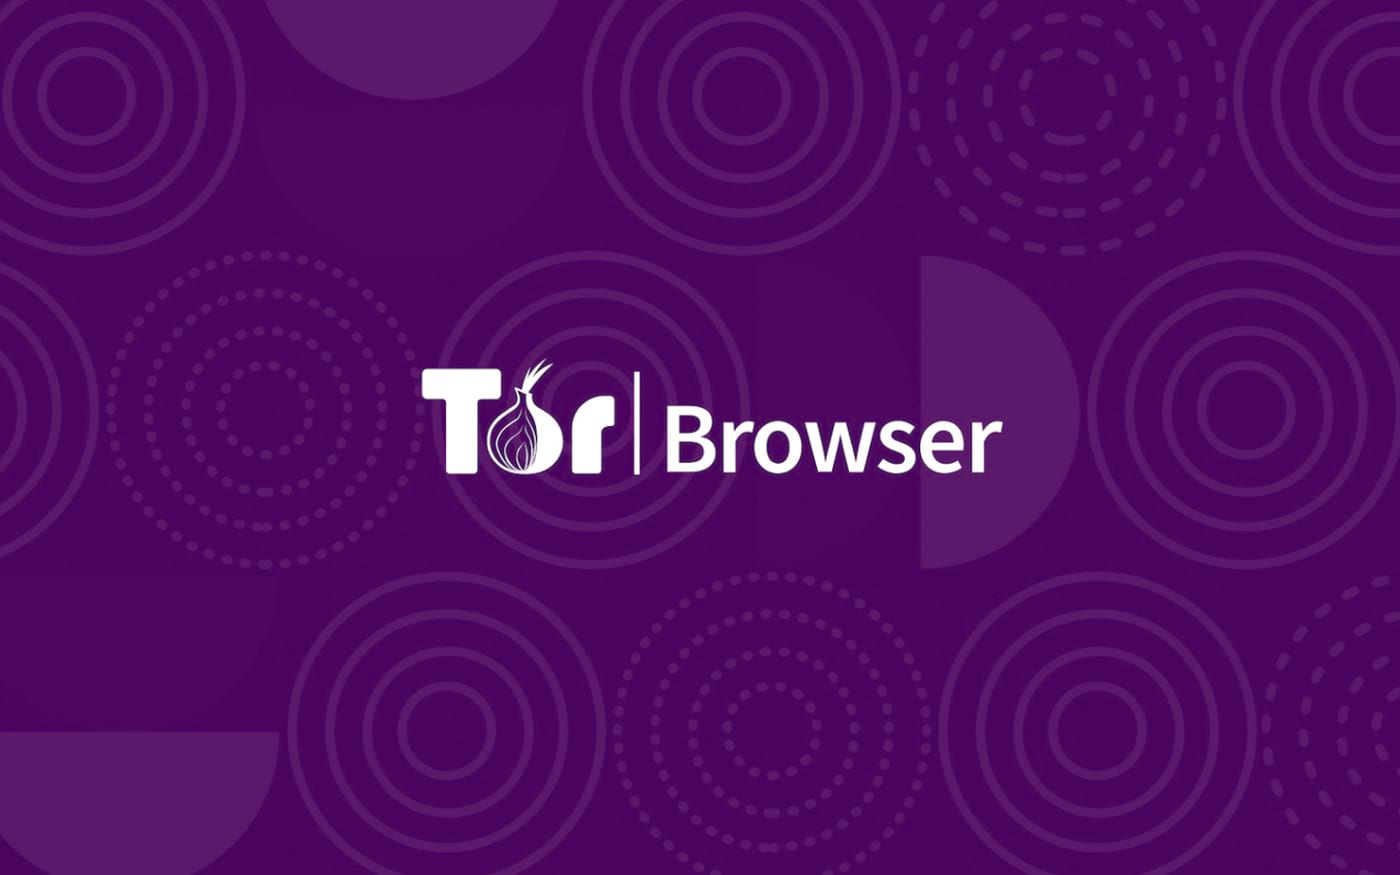 Download master for tor browser gydra ps3 прошивка darknet гидра